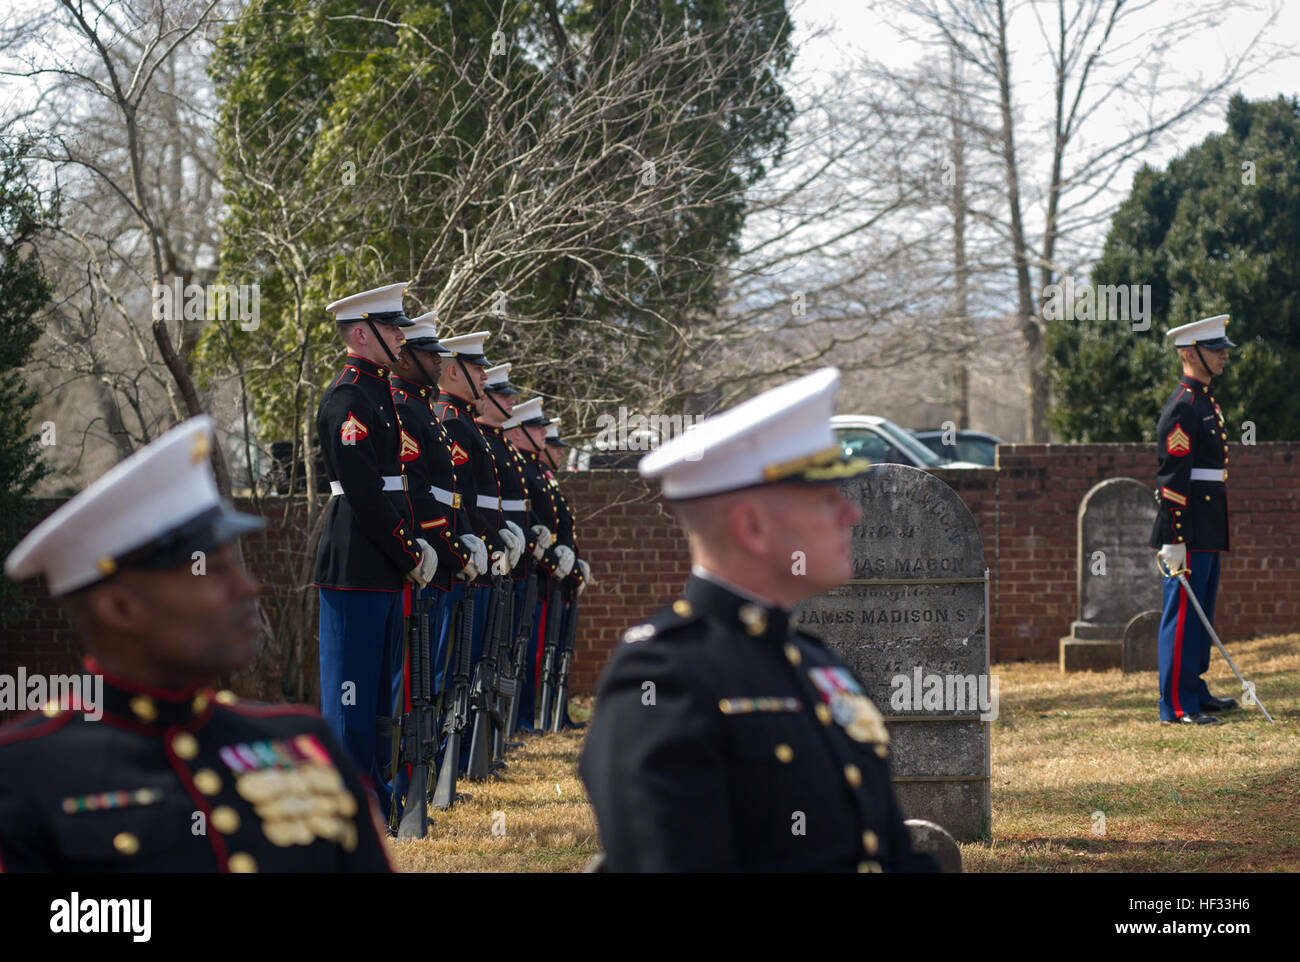 U.S. Marines with Marine Corps Base Quantico's Rifle Detail stand at parade rest during the Presidential wreath laying ceremony held at the final resting place of the 4th President of the United States, James Madison, also known as the Father of the Constitution, at his home at Montpelier, Orange, Va., March 16, 2015. This event was held in commemoration of the 264th anniversary of the birthdate of Madison, and has also been decreed as James Madison Appreciation Day for the Commonwealth of Virginia. (Official United States Marine Corps photo by Kathy Reesey/Released) Madison Wreath Laying Cere Stock Photo